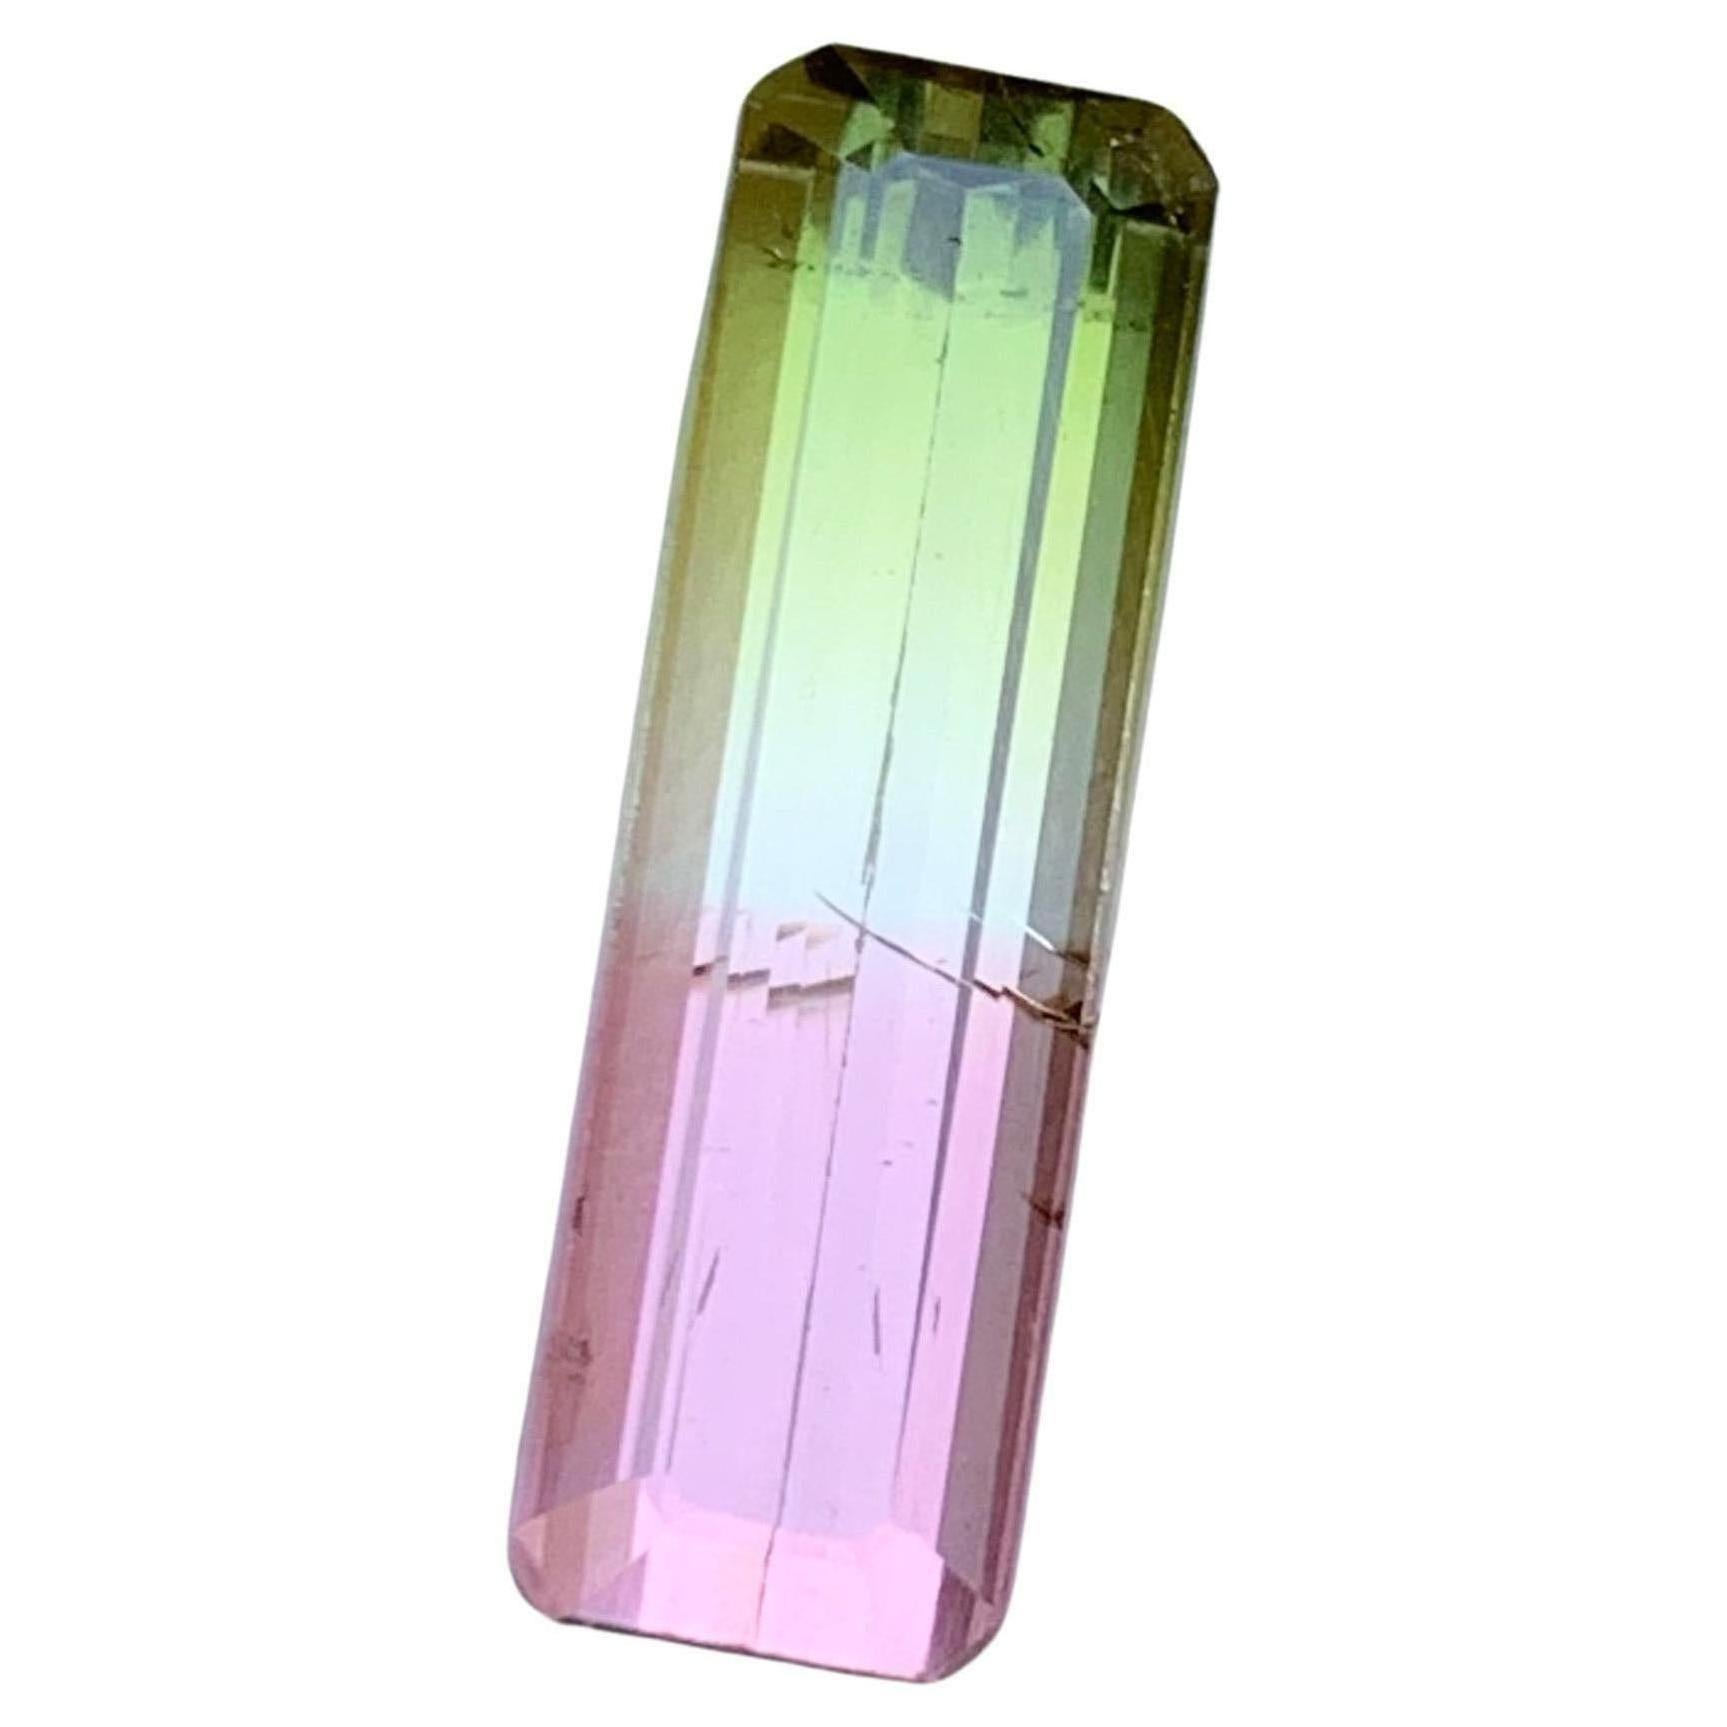 GEMSTONE TYPE: Tourmaline
PIECE(S): 1
WEIGHT: 5.90 Carats
SHAPE: Emerald 
SIZE (MM): 19.23 x 6.05 x 5.25
COLOR: Bicolor
CLARITY: Slightly Included 
TREATMENT: None
ORIGIN: Afghanistan
CERTIFICATE: On demand

Behold, a captivating gem born from the